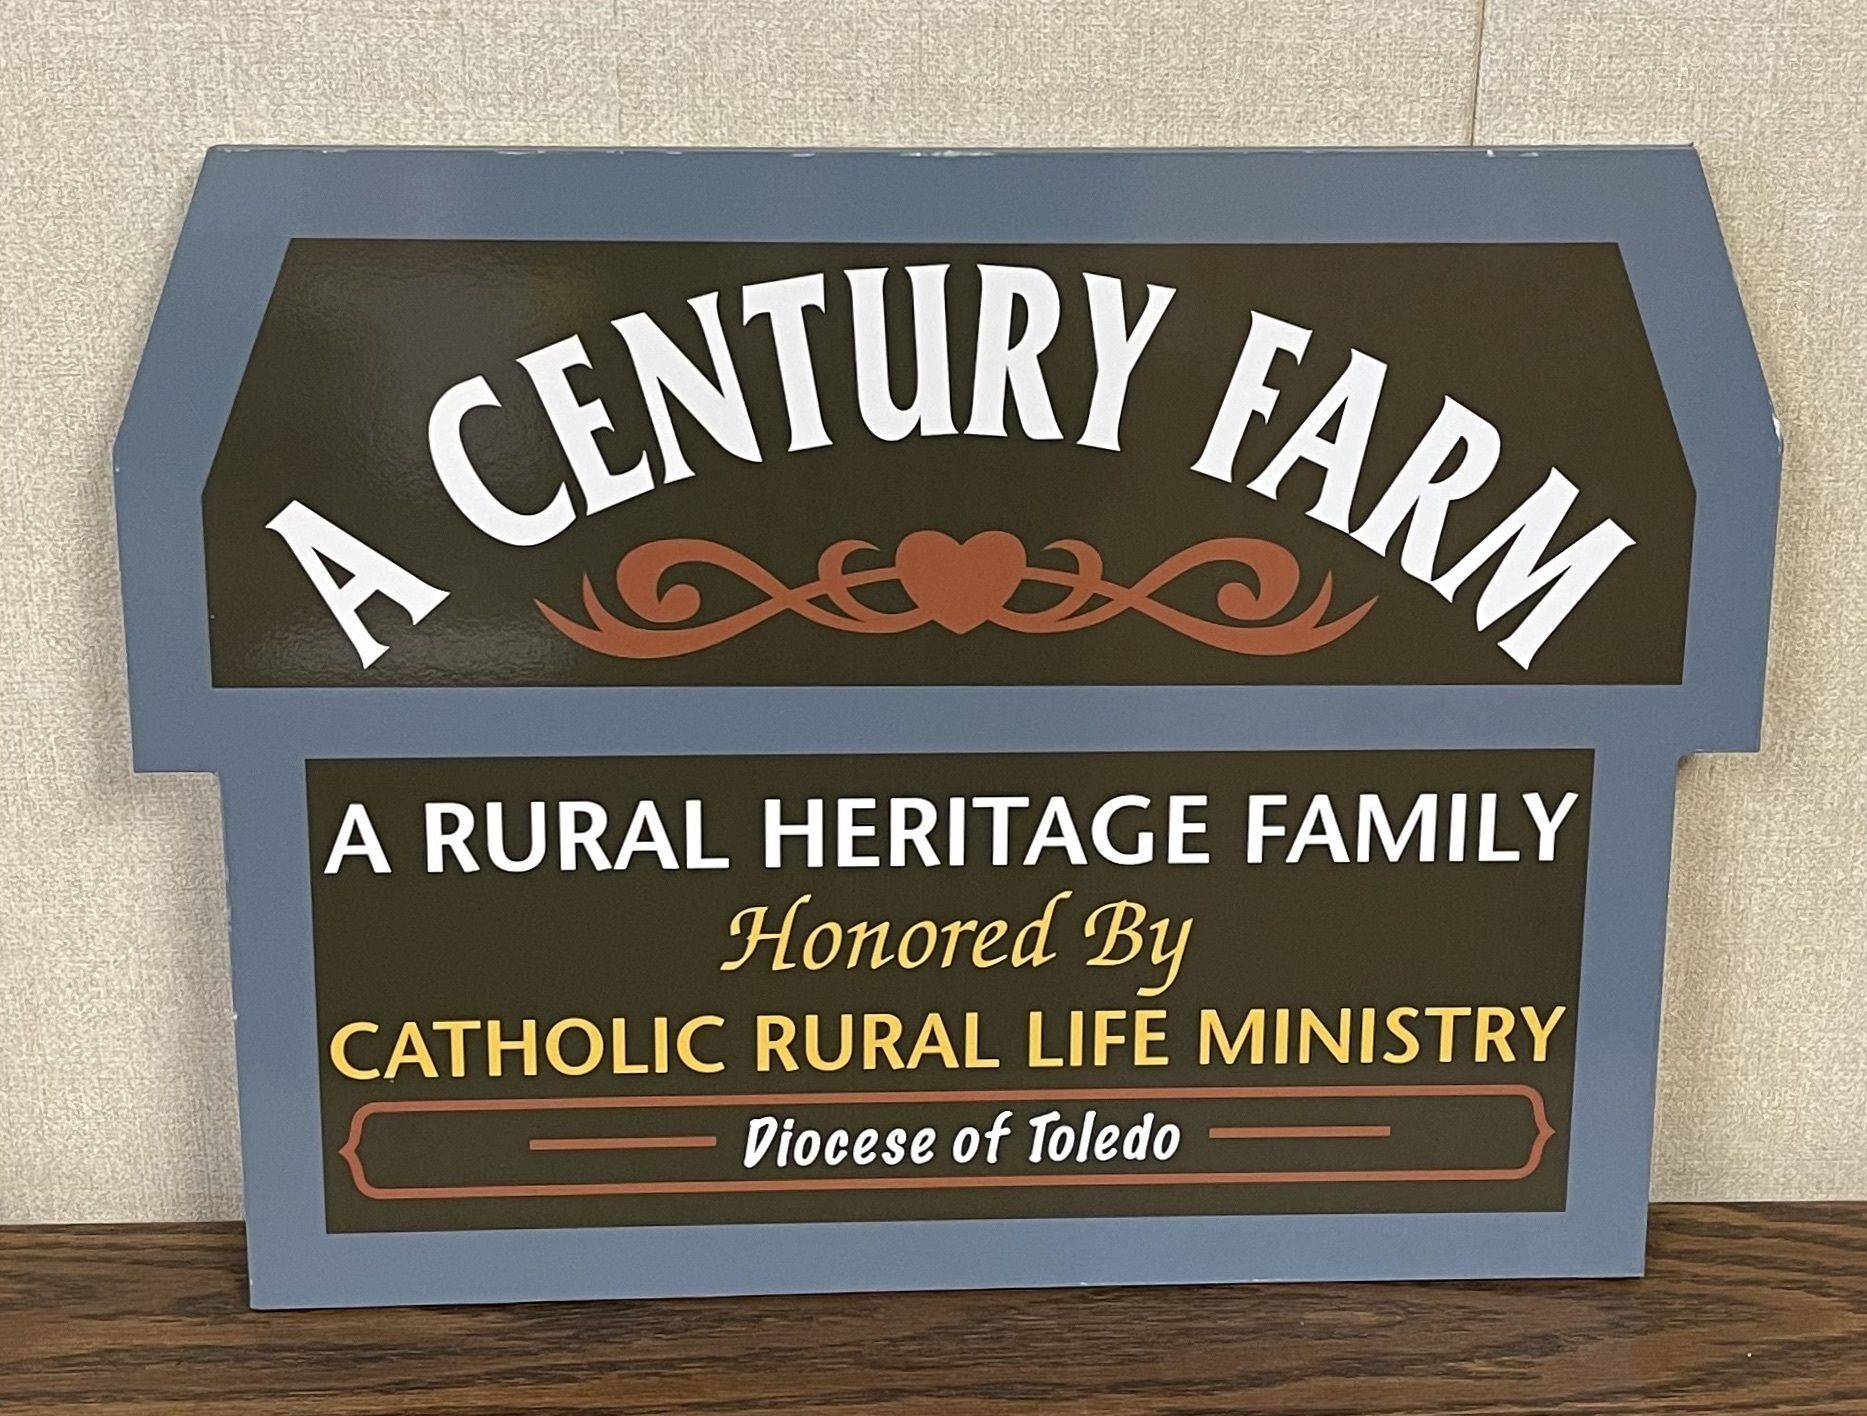 Submit Century Farm Awards Applications By Oct. 10